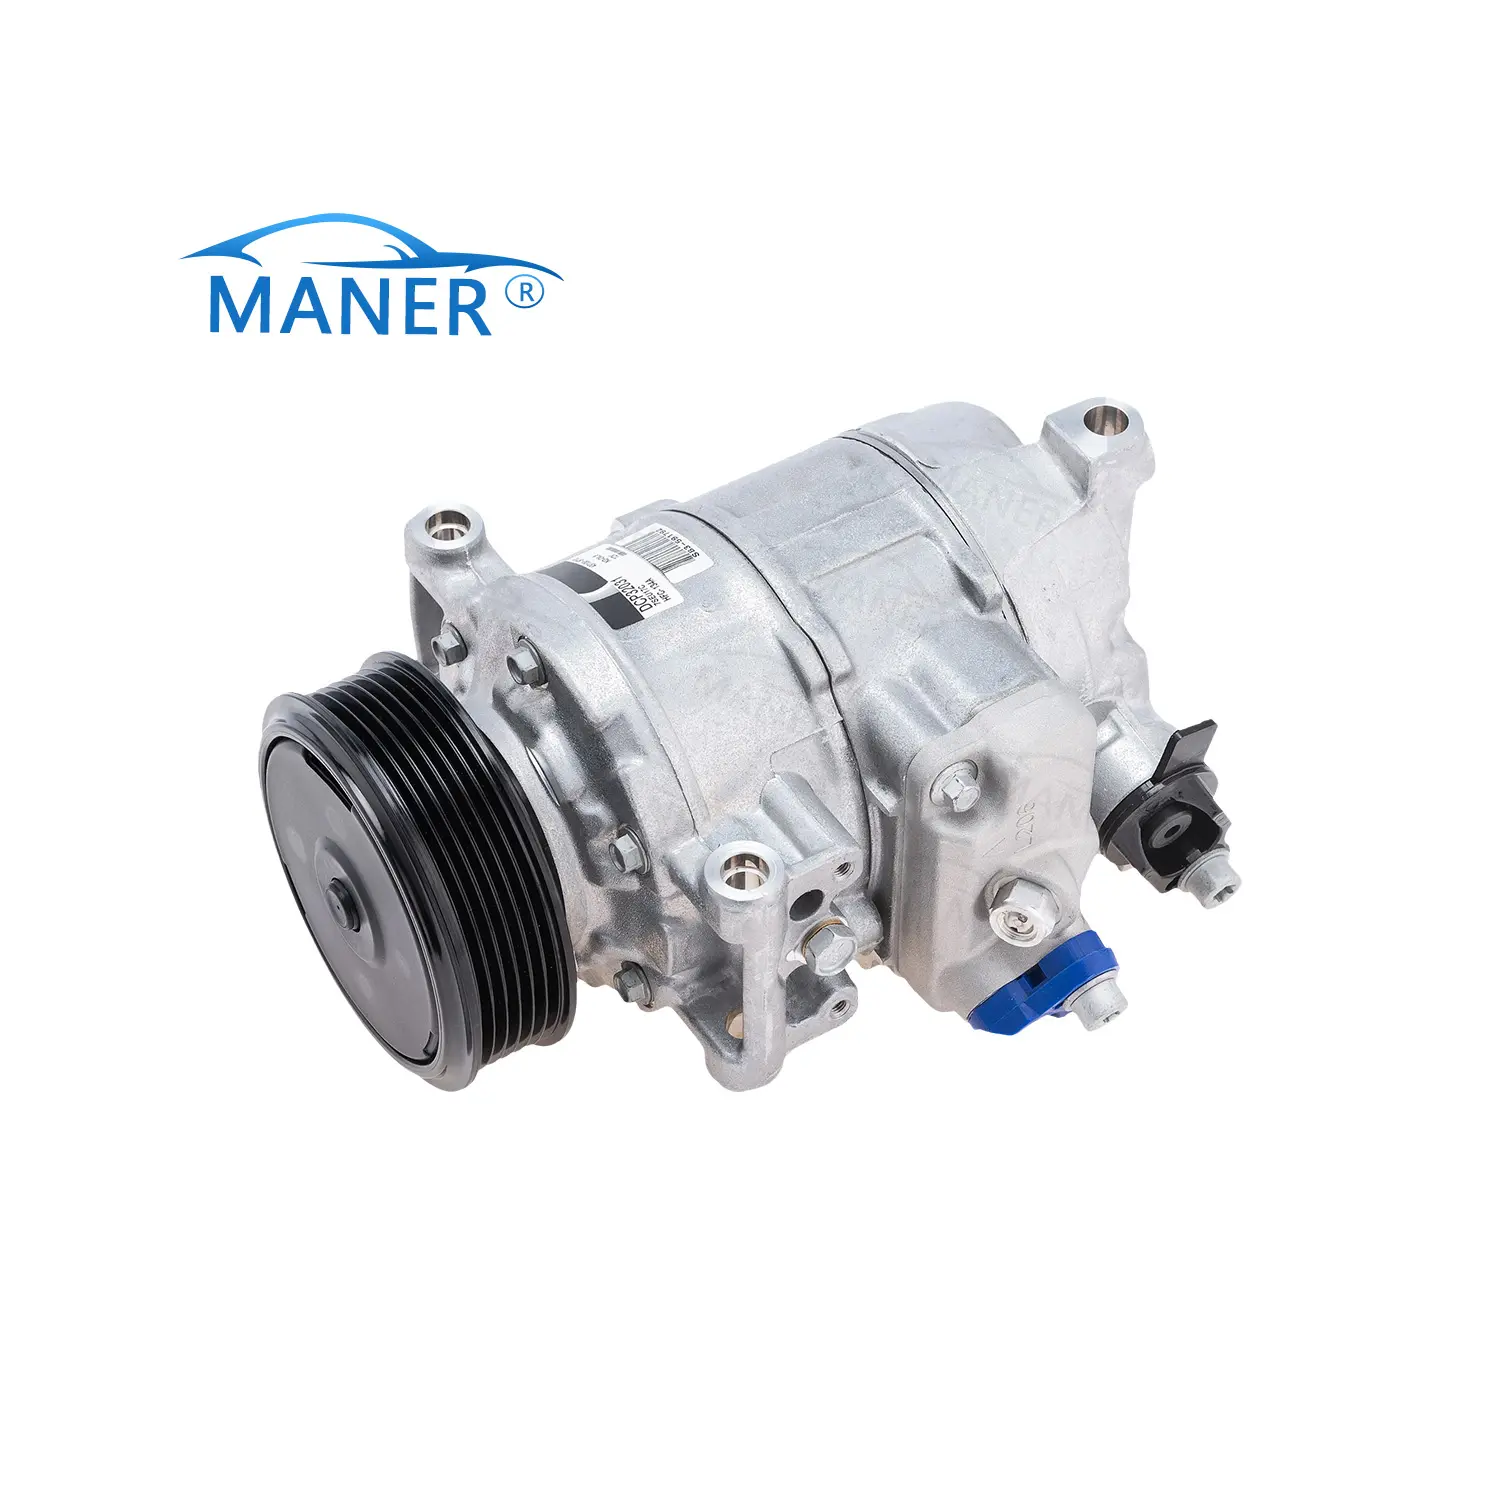 MANER engine parts Air Conditioning Compressor 4F0260805AC 4F0260805AA 8K0260805 for Audi A4 Avant A6 S4 S6